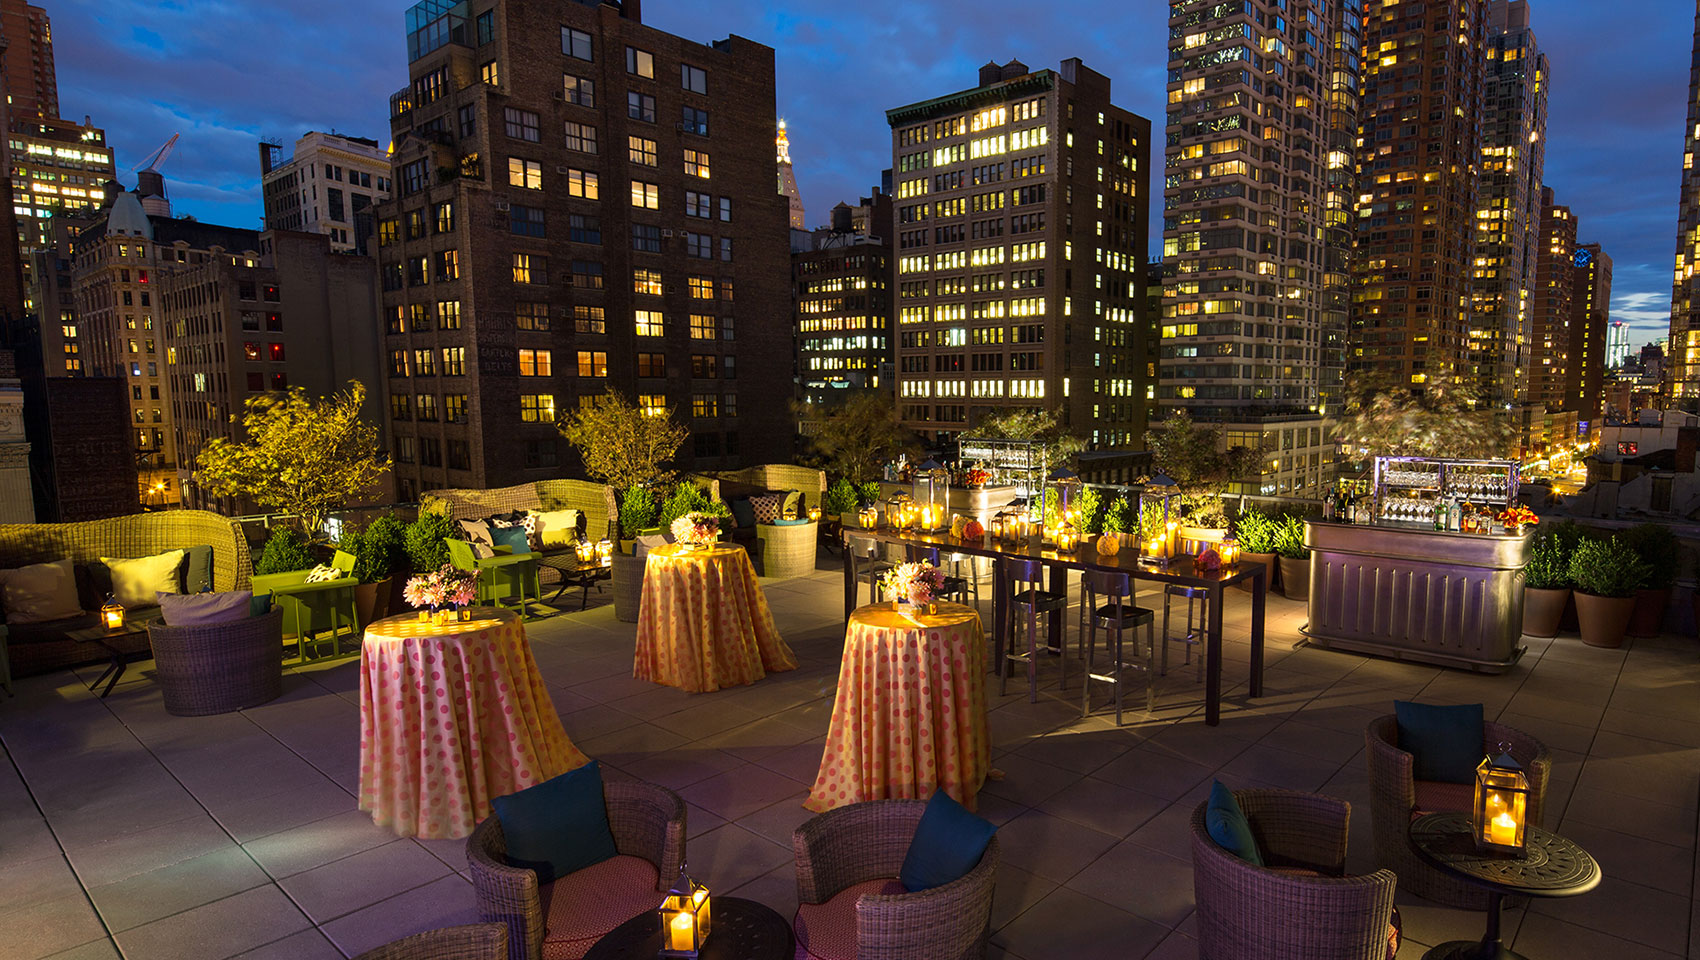 Kimpton Hotel Eventi Veranda set up for outdoor event with tables and bar against city building views at night